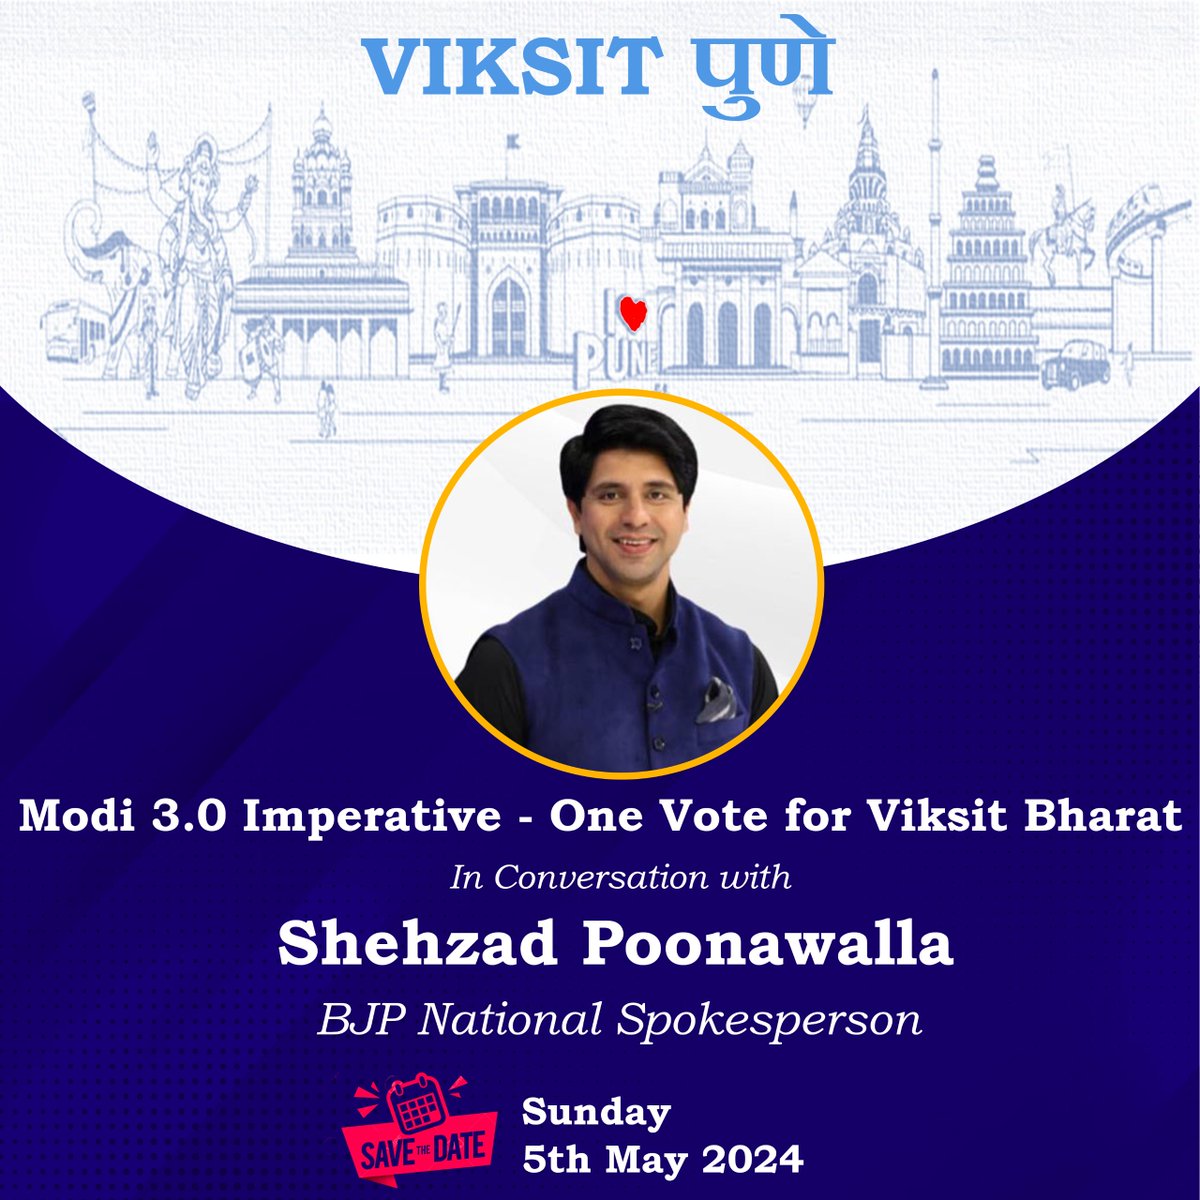 We are looking forward to hosting my friend, the eloquent, dynamic & hard-hitting @BJP4India National Spokesperson Shri @Shehzad_Ind ji in Pune on May 5 on the @viksit_pune platform for an engaging talk titled: The Modi 3.0 Imperative - One Vote for Viksit Bharat #ViksitBharat